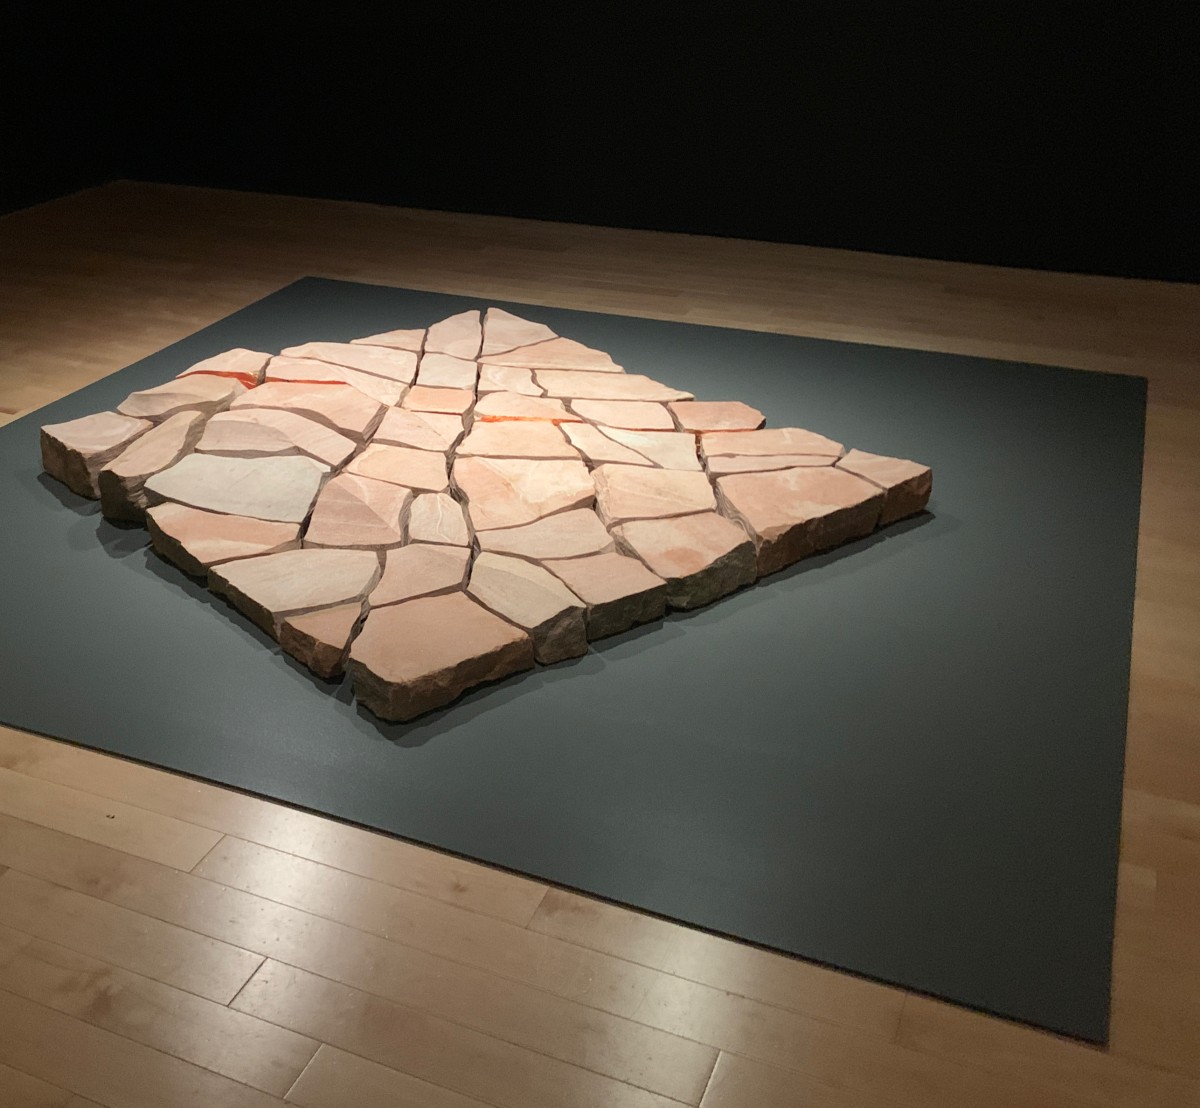 Image of a sculptural artwork by Michael Belmore, installed on the floor 